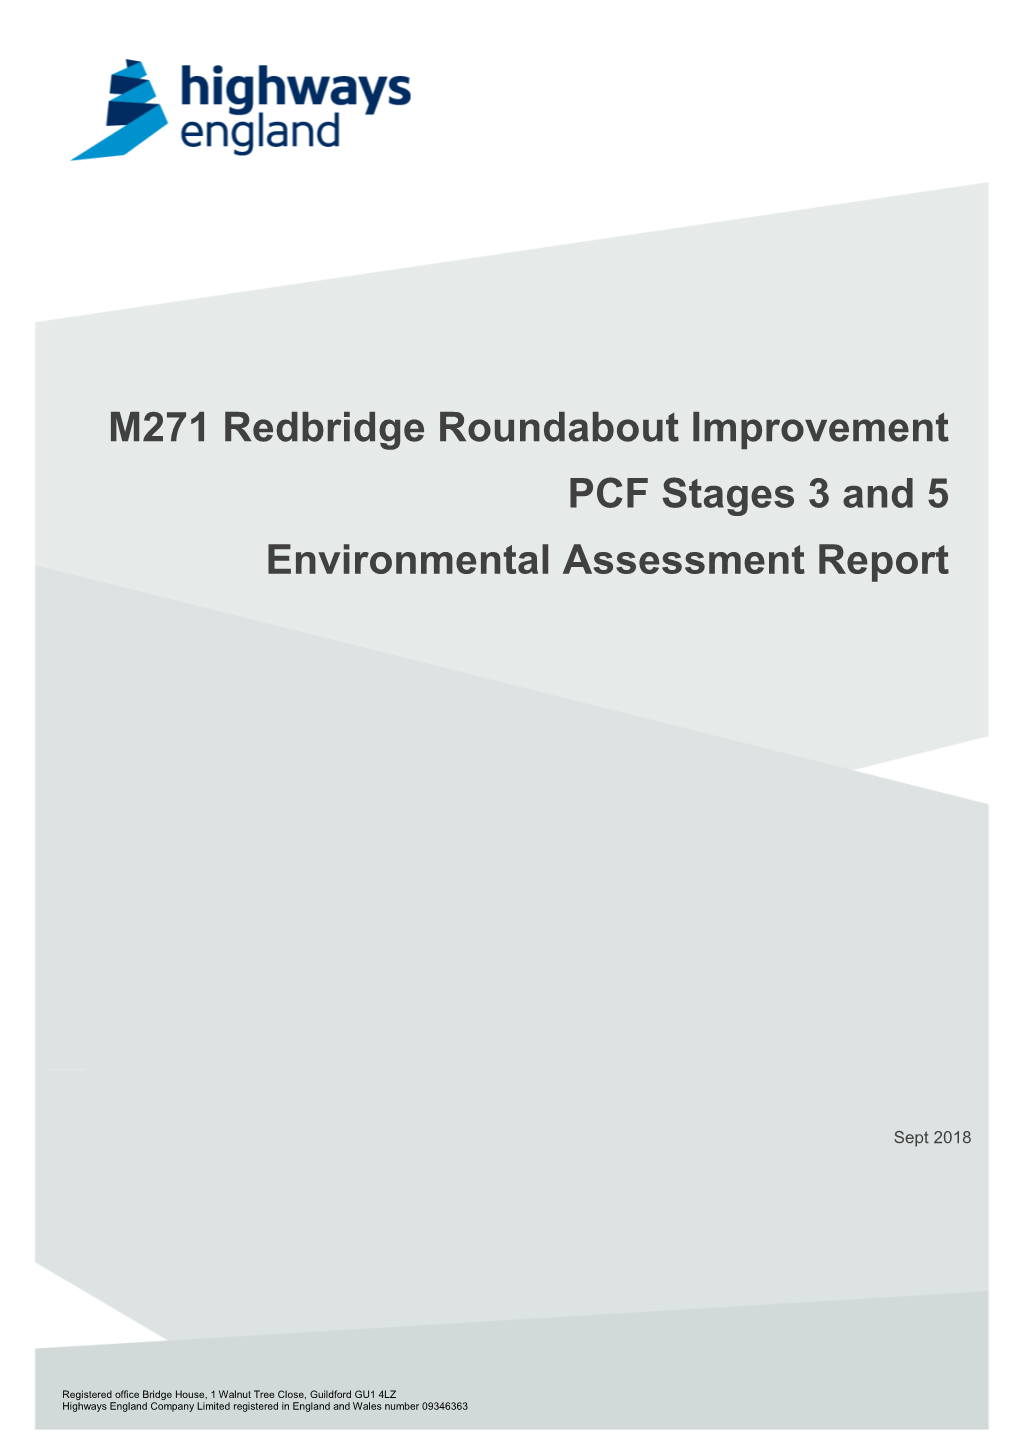 M271 Redbridge Roundabout Improvement PCF Stages 3 and 5 Environmental Assessment Report